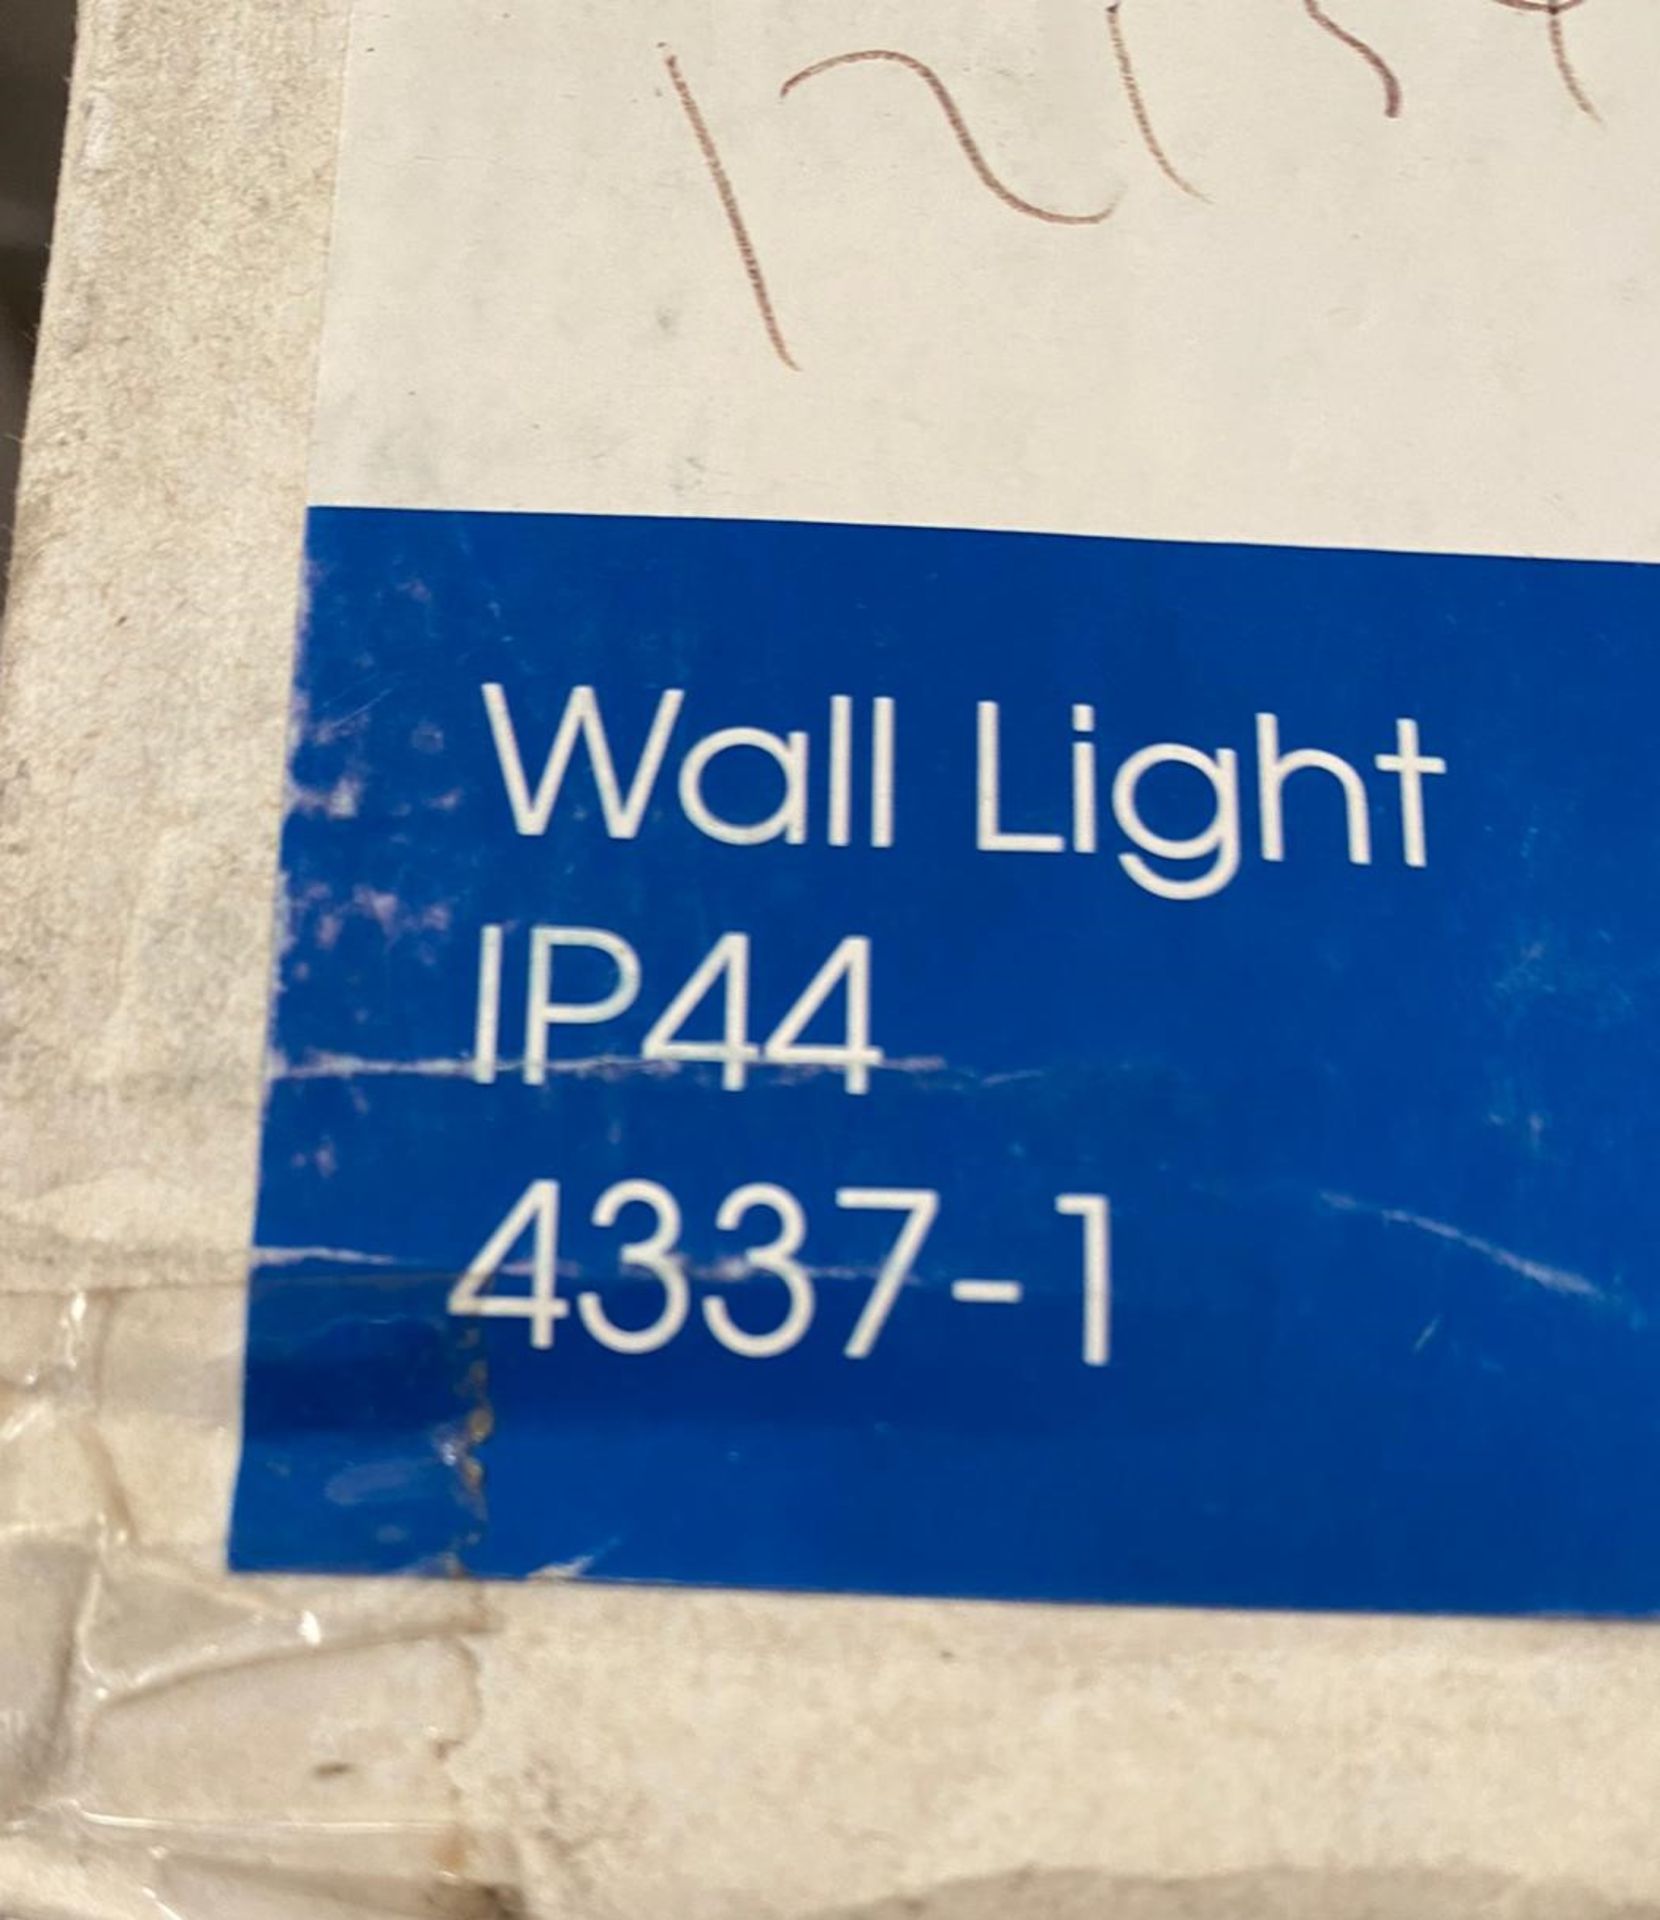 1 x Searchlight LED Wall Light in chrome with a glass shade - Ref: 4337-1 - New and Boxed Stock - Image 2 of 4